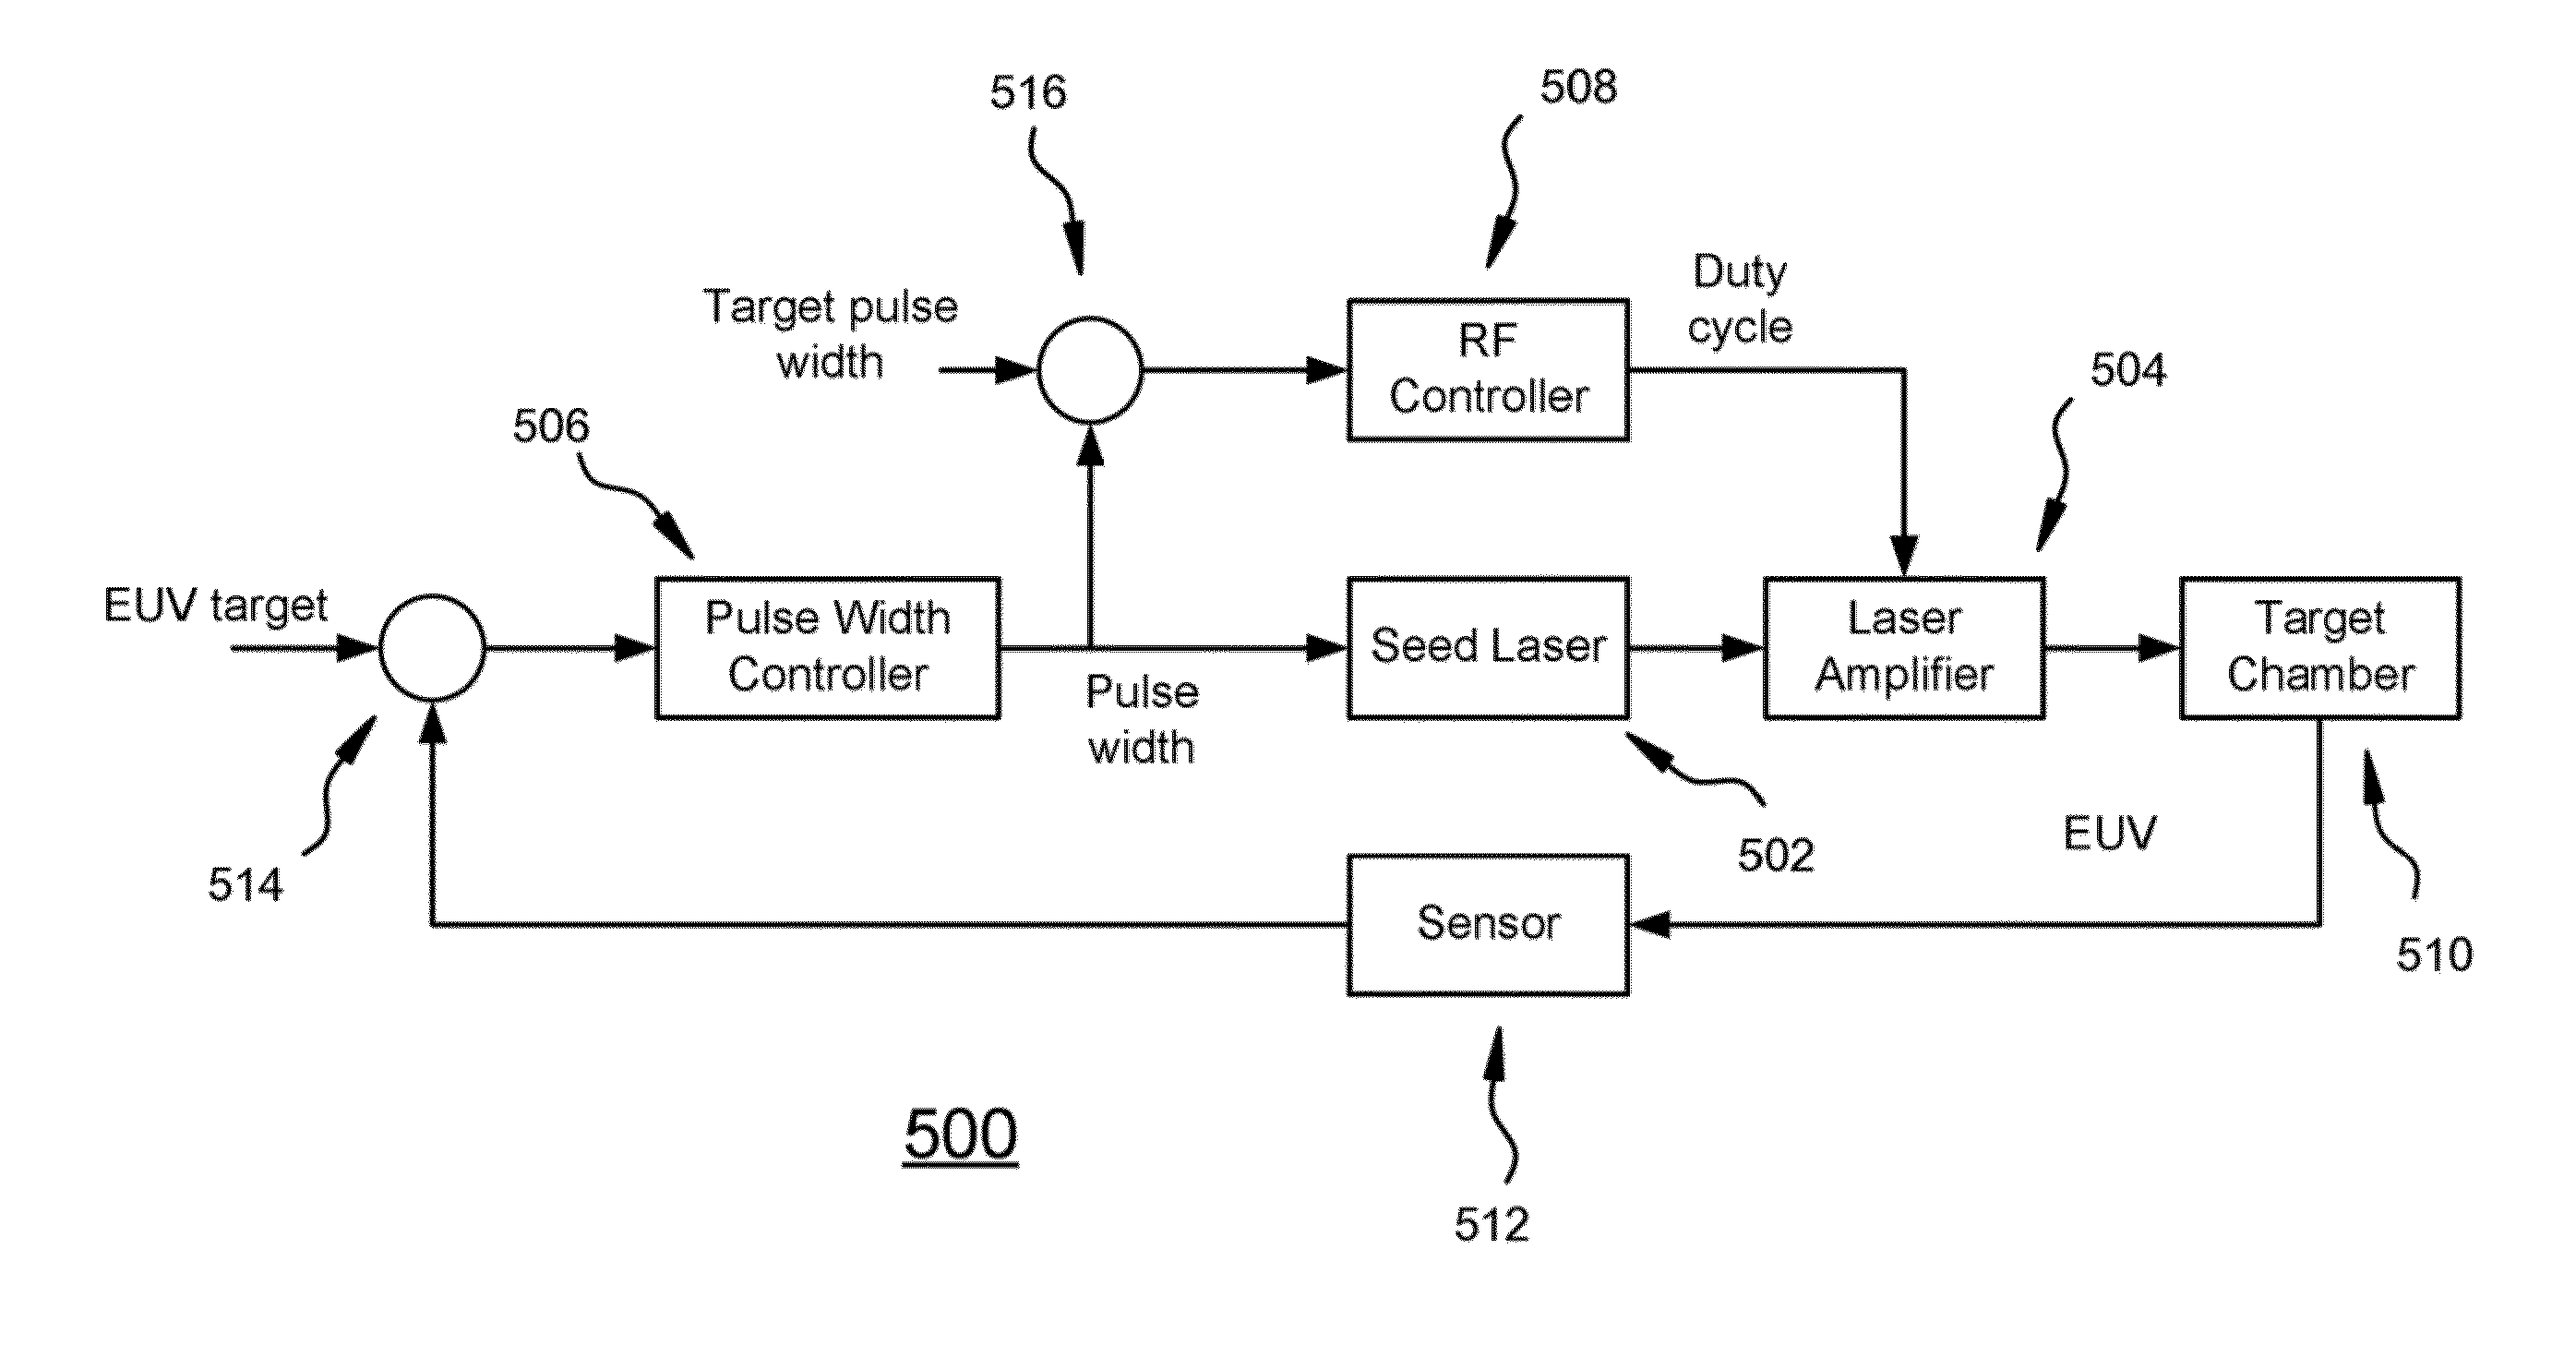 System and Method for Adjusting Seed Laser Pulse Width to Control EUV Output Energy